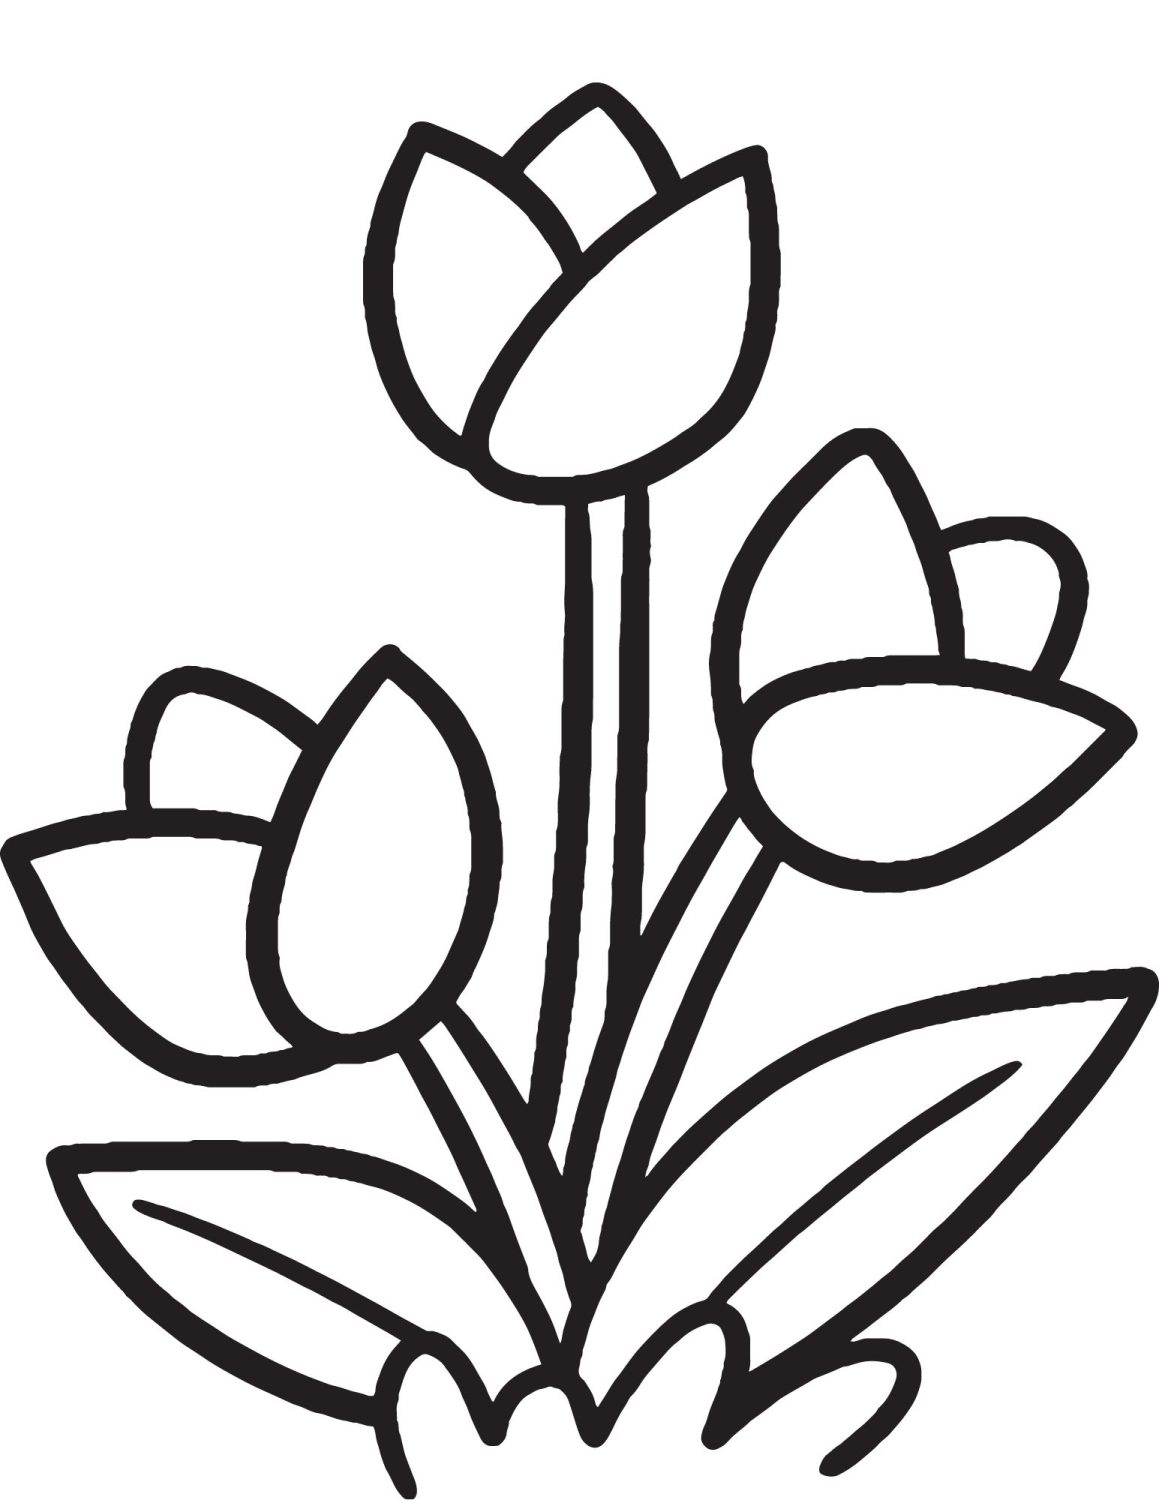 Geometric tulip coloring page for kids. 